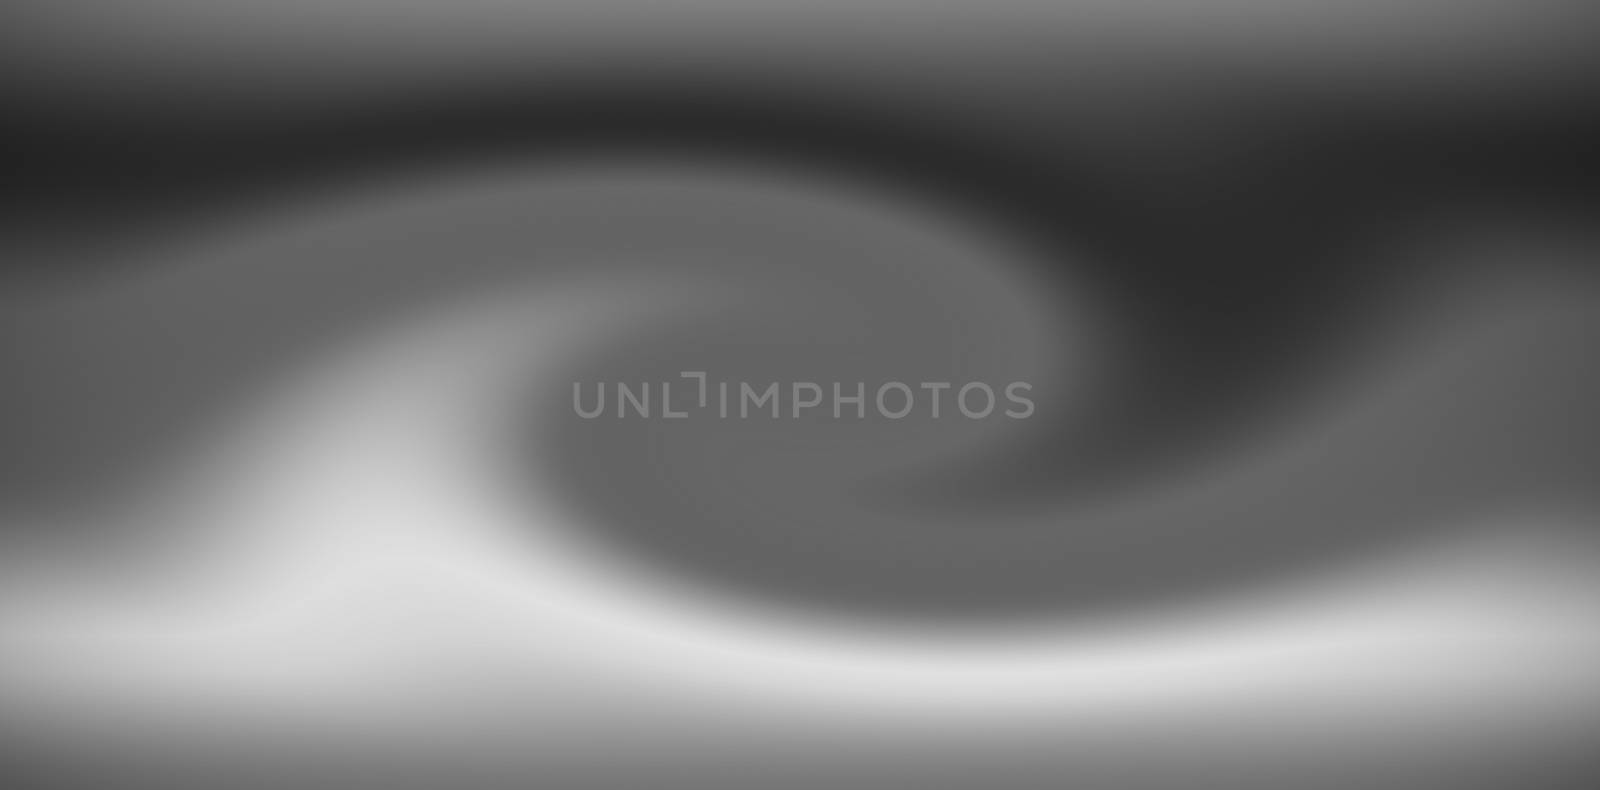 beautiful illustration of abstract background used for website, black and white